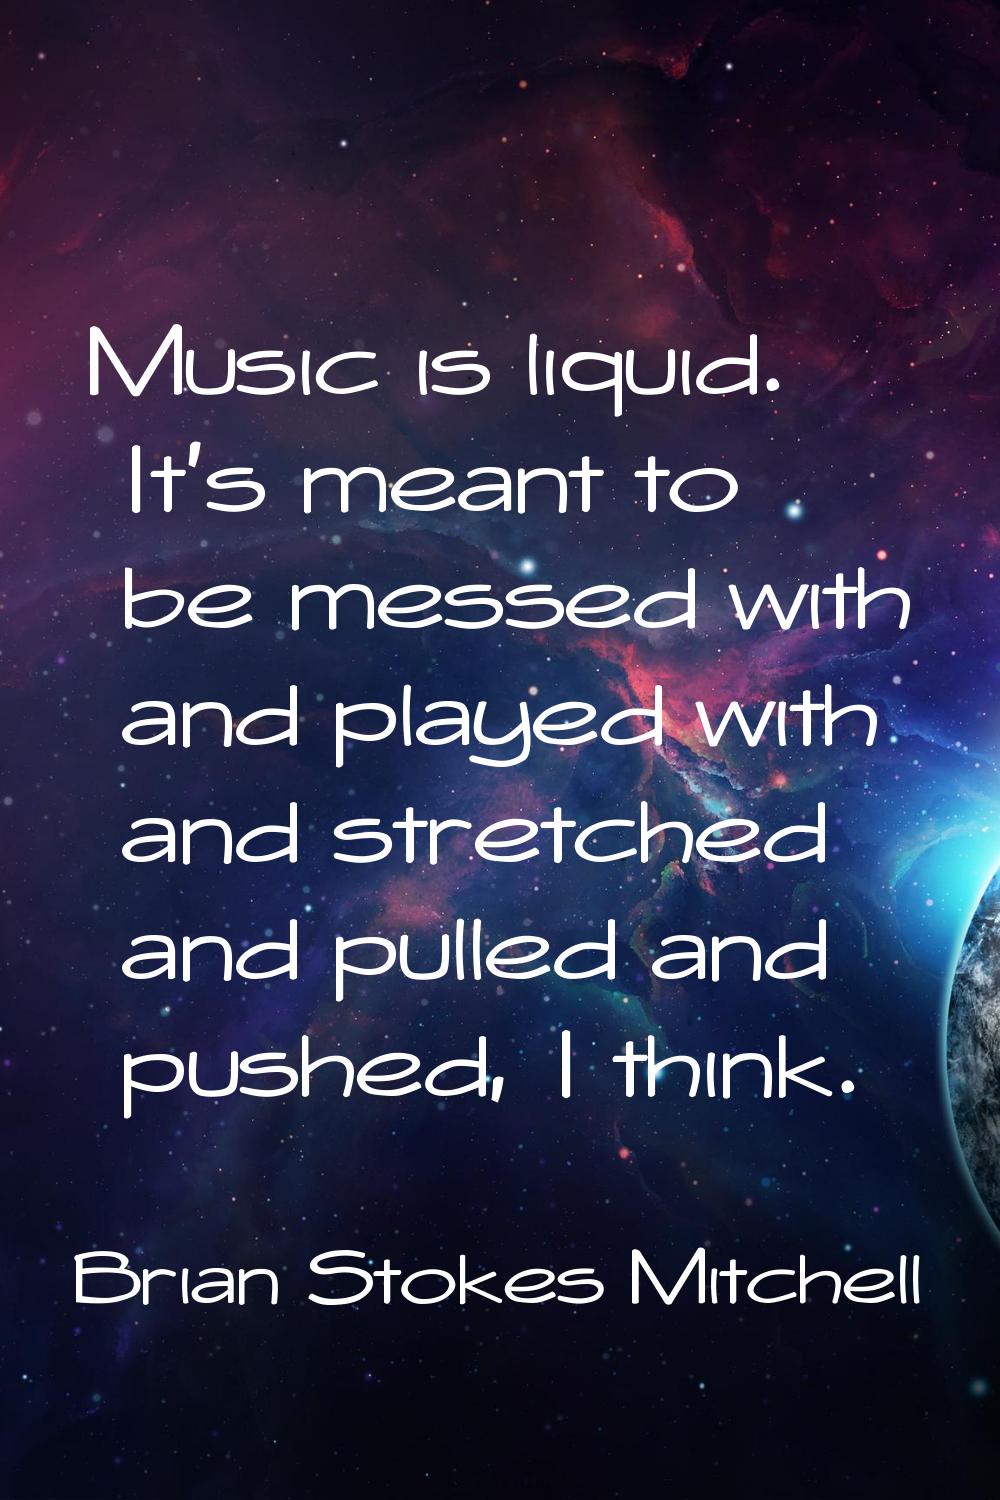 Music is liquid. It's meant to be messed with and played with and stretched and pulled and pushed, 